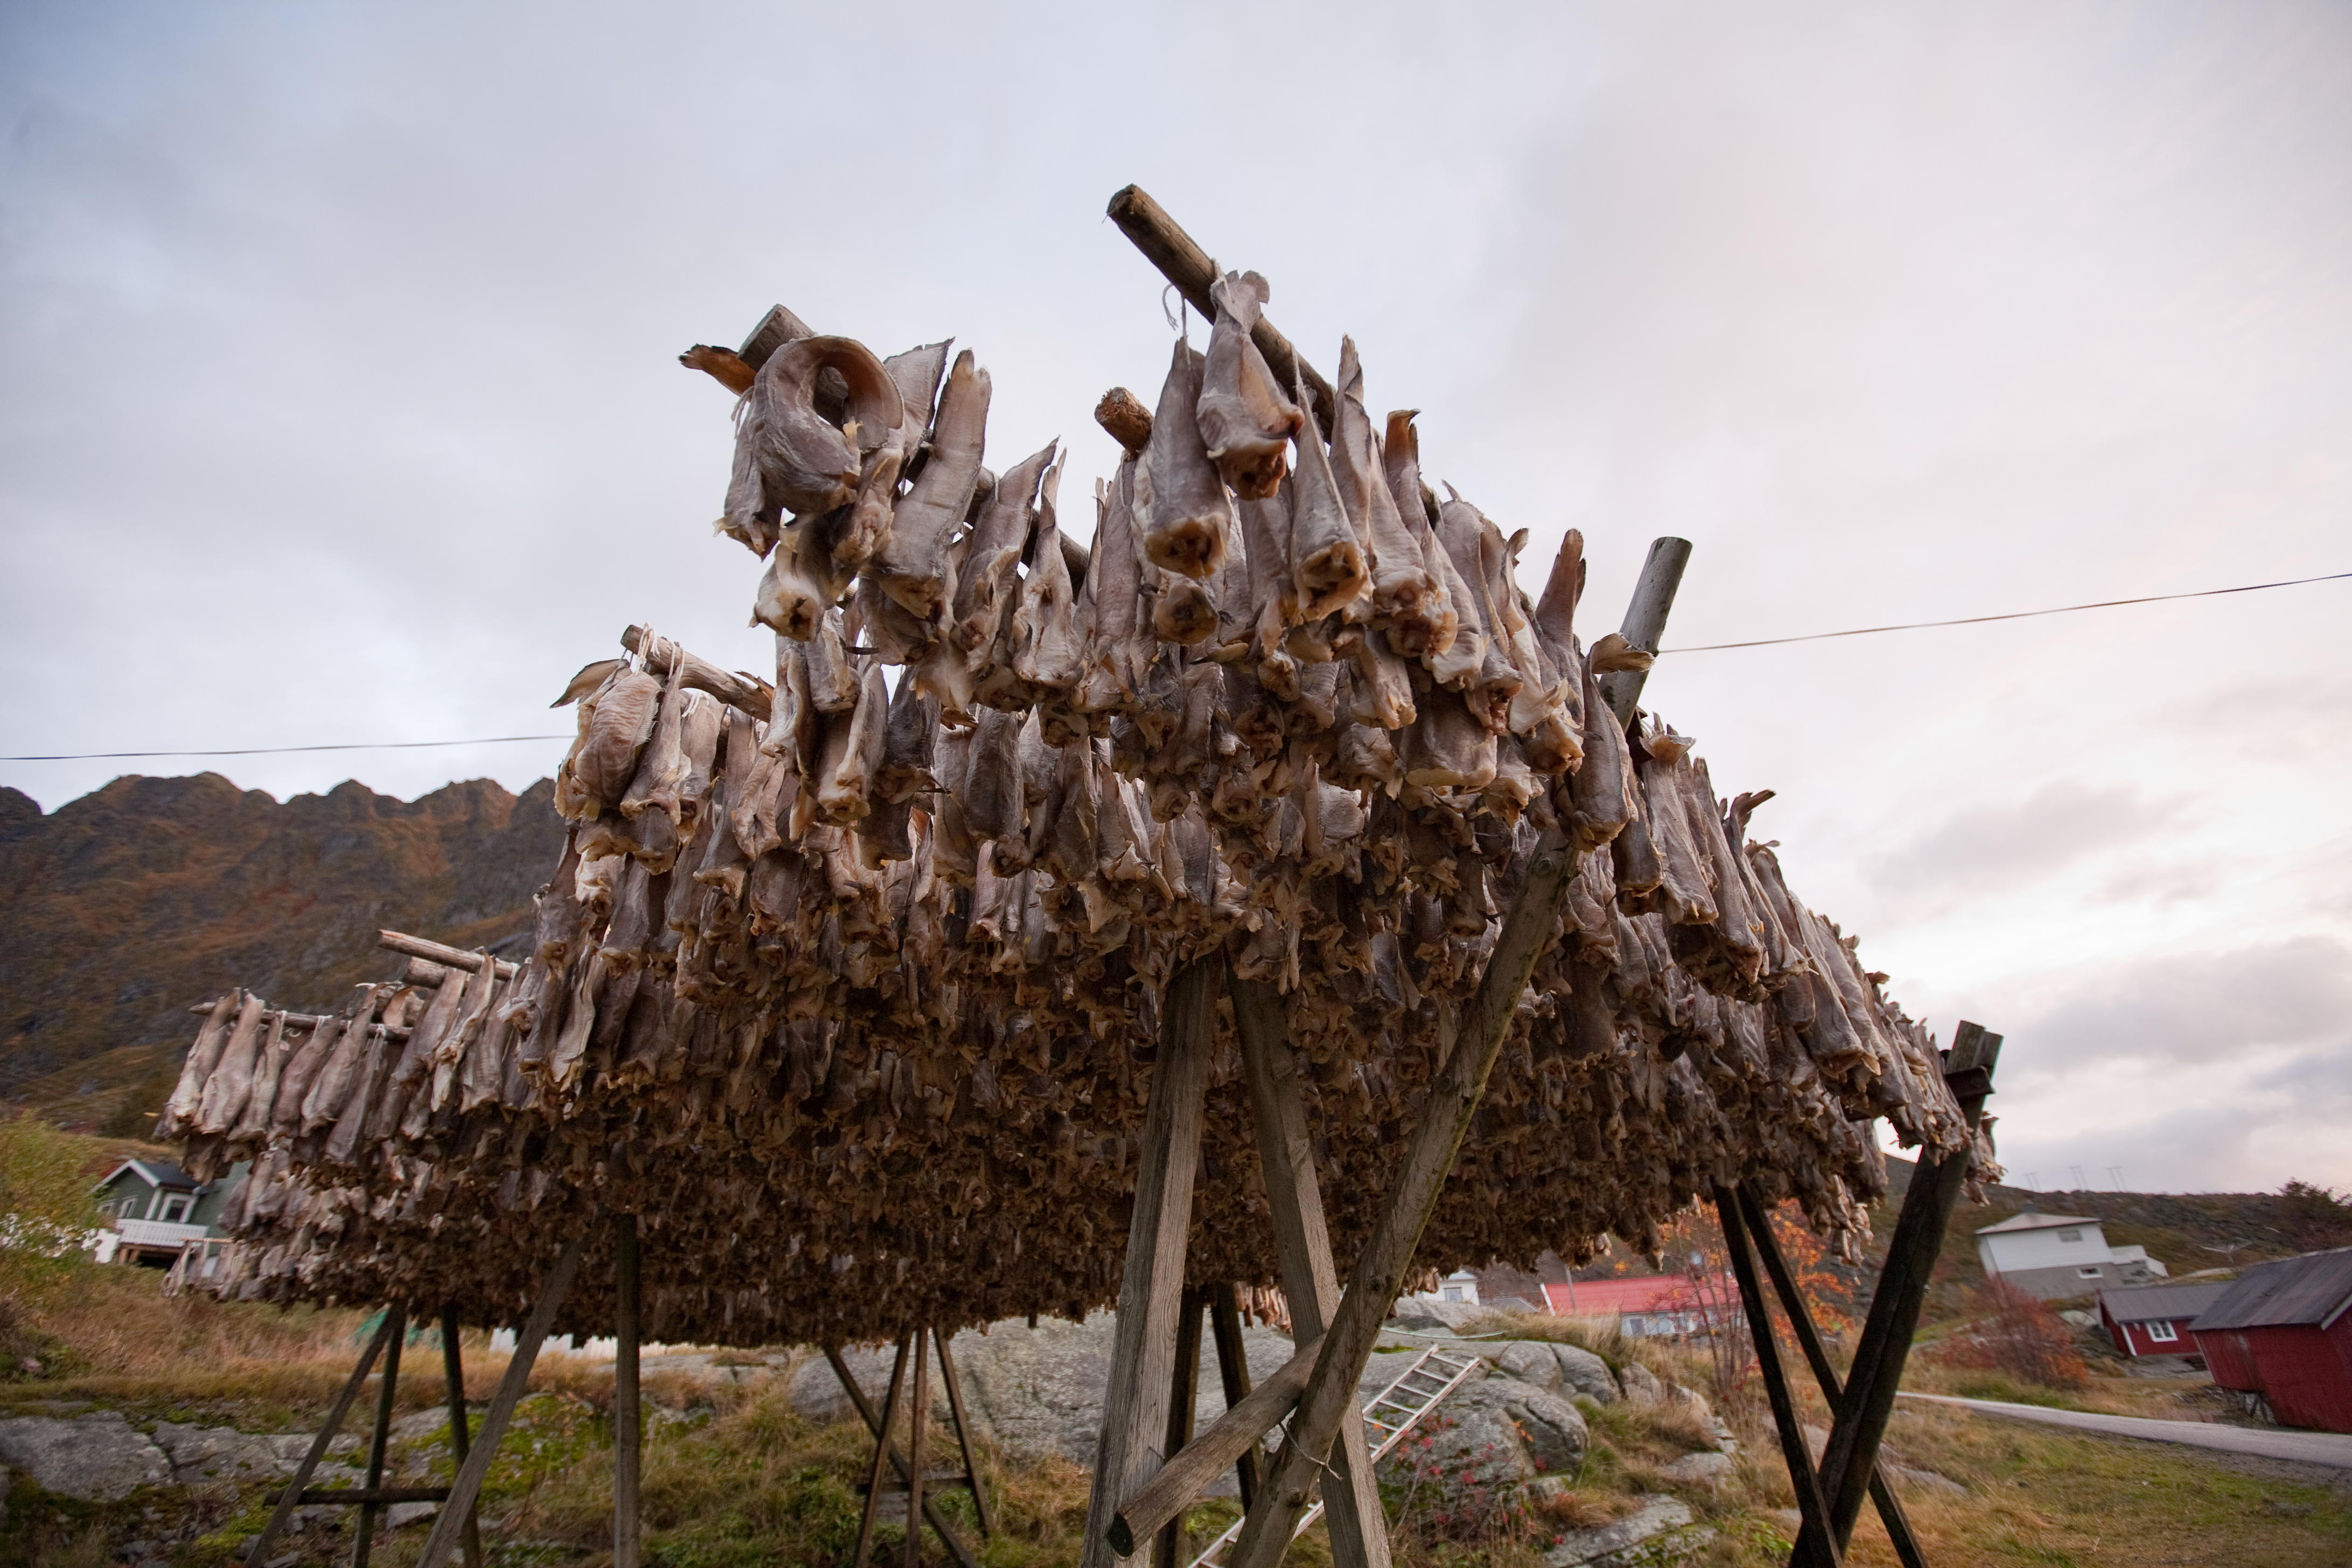 Traditional racks for the drying of cod (Gadus Morhua) in Lofoten